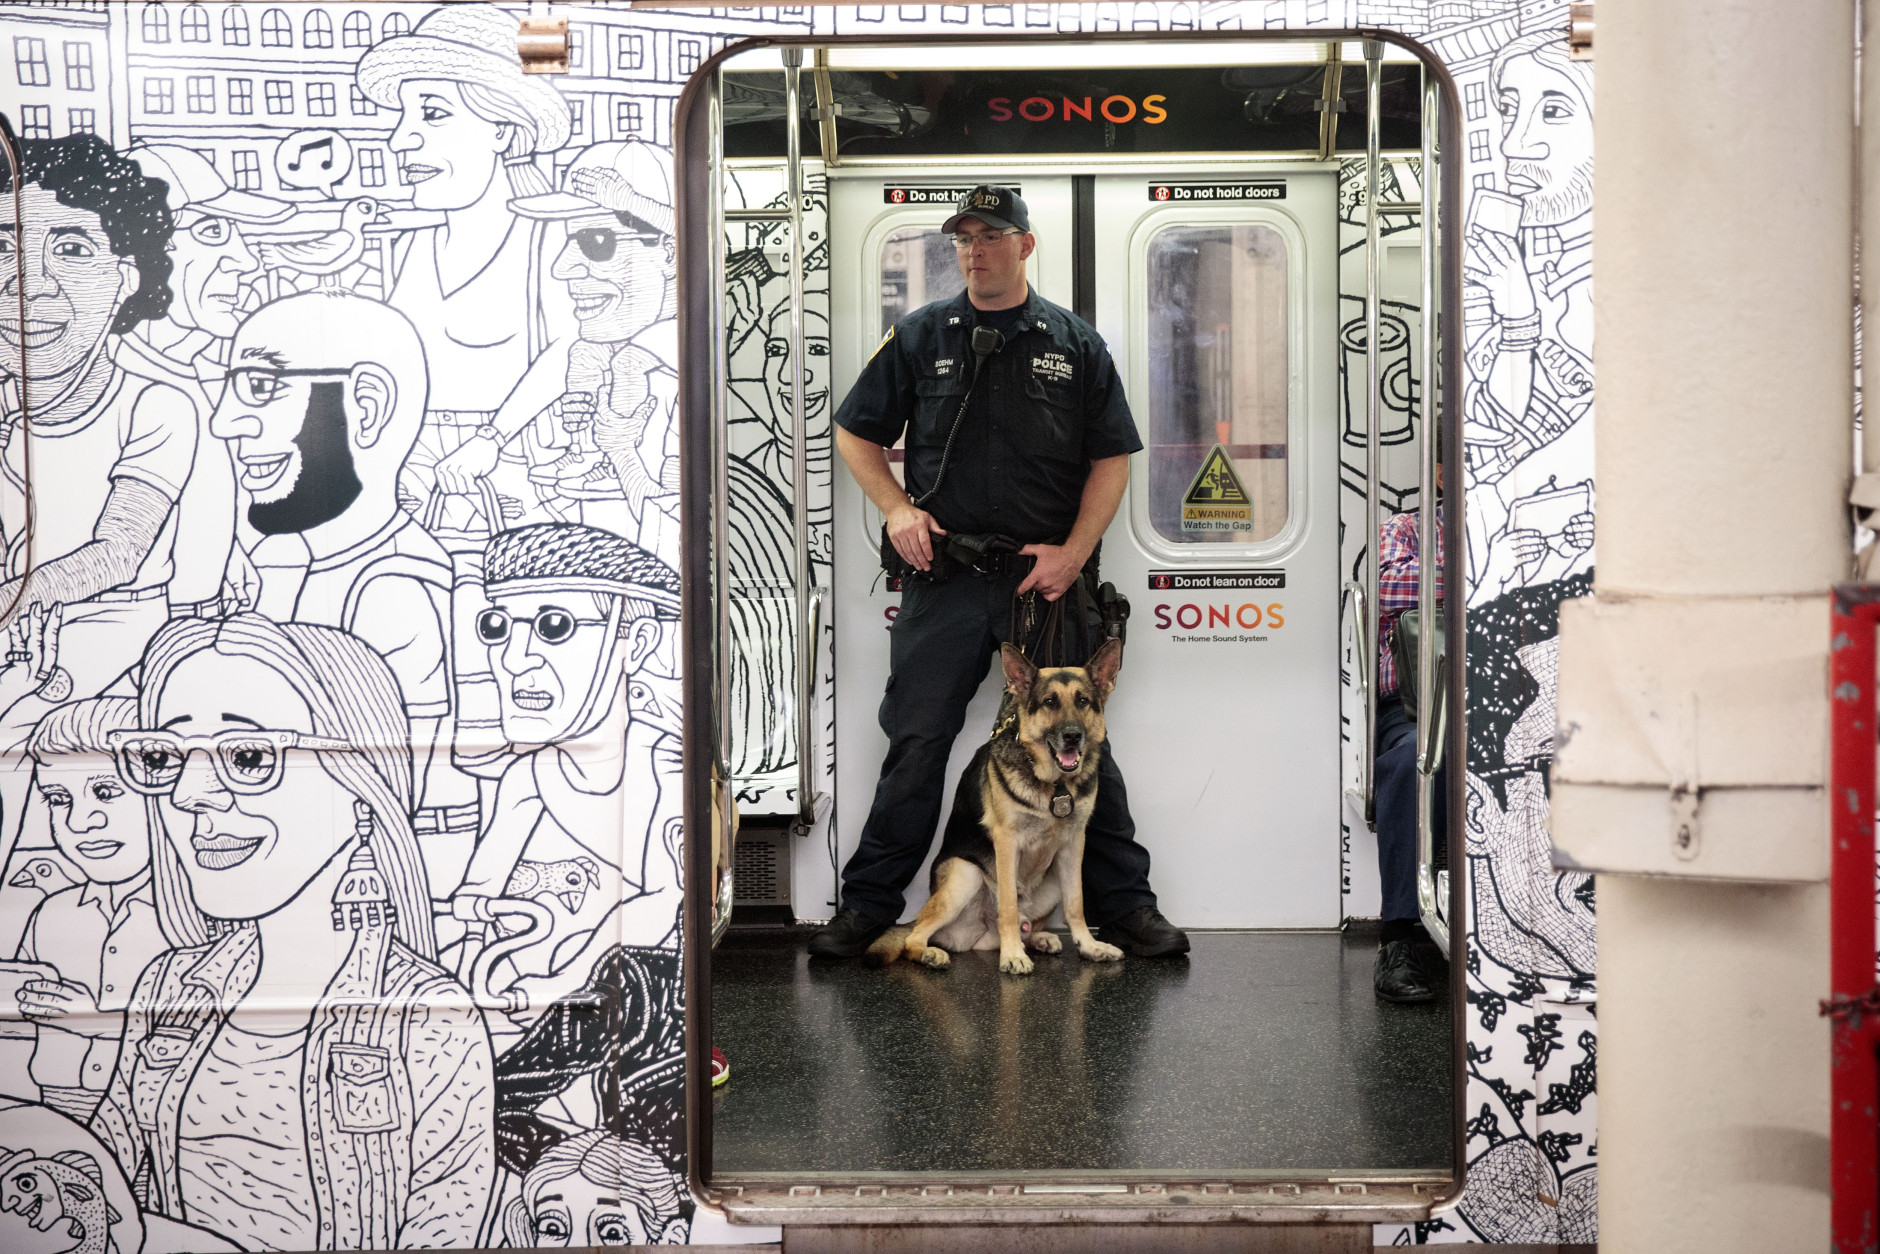 NEW YORK, NY - SEPTEMBER 18: A member of the New York City Police Department K-9 Unit patrols on a subway train between Grand Central Terminal and Times Square, September 18, 2016 in New York City. Following Saturday night's explosion in the Chelsea neighborhood of Manhattan, Mayor Bill de Blasio has promised a 'substantial' police presence throughout the week. New York Governor Andrew Cuomo also said an additional 1,000 New York State and National Guard troops will patrol transit stations and airports as a precaution. (Photo by Drew Angerer/Getty Images)